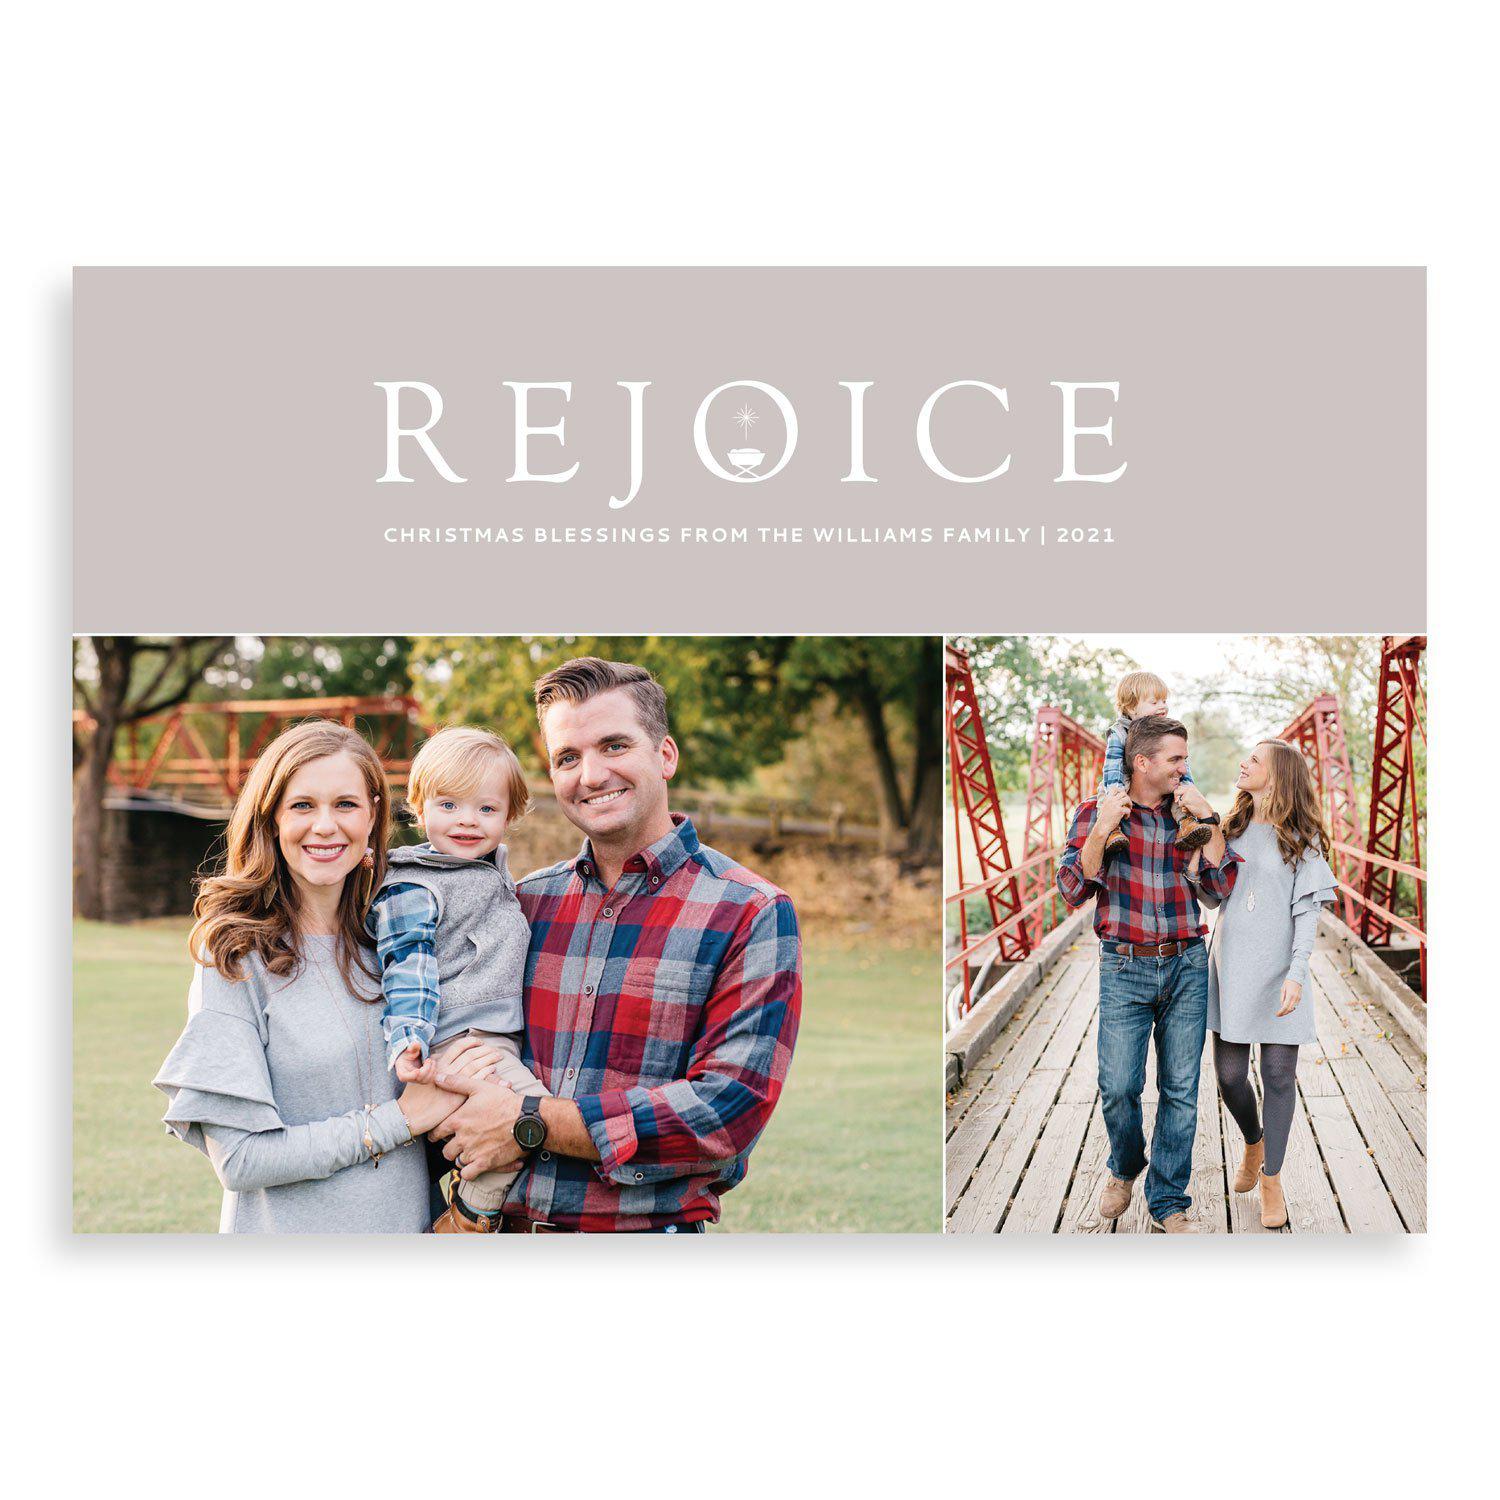 Simple, beautiful, and meaningful religious Christmas photo cards from Muscadine Press.